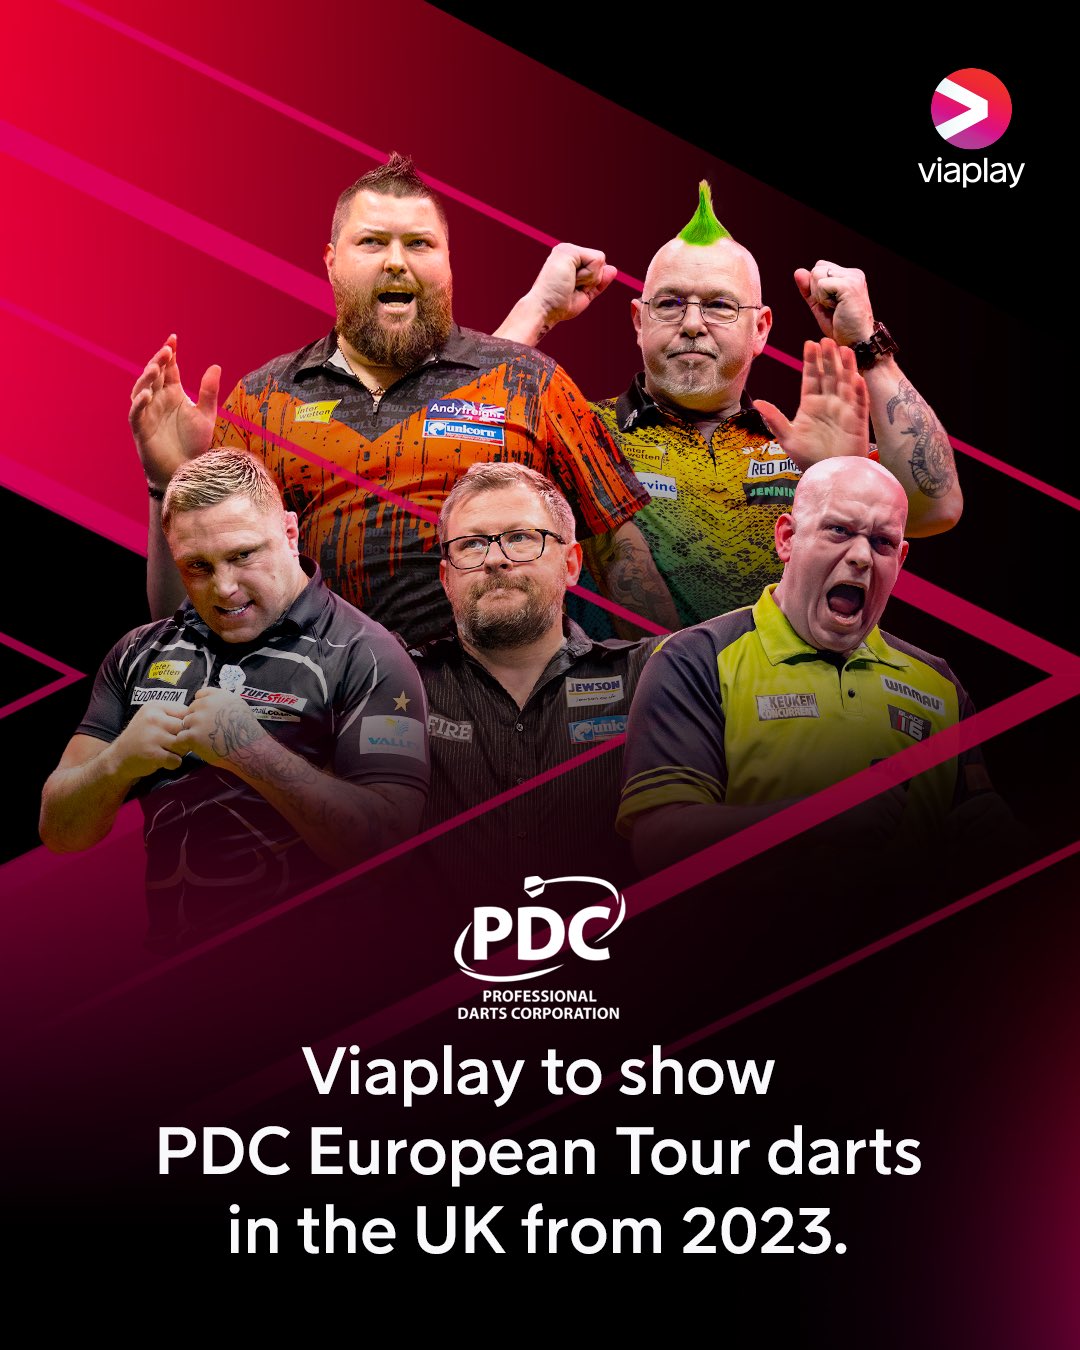 Viaplay UK on Twitter: "We are delighted to announce that will PDC European Tour darts in the UK! 13 live events the season beginning February 2023! https://t.co/h61OgRBtwB" /